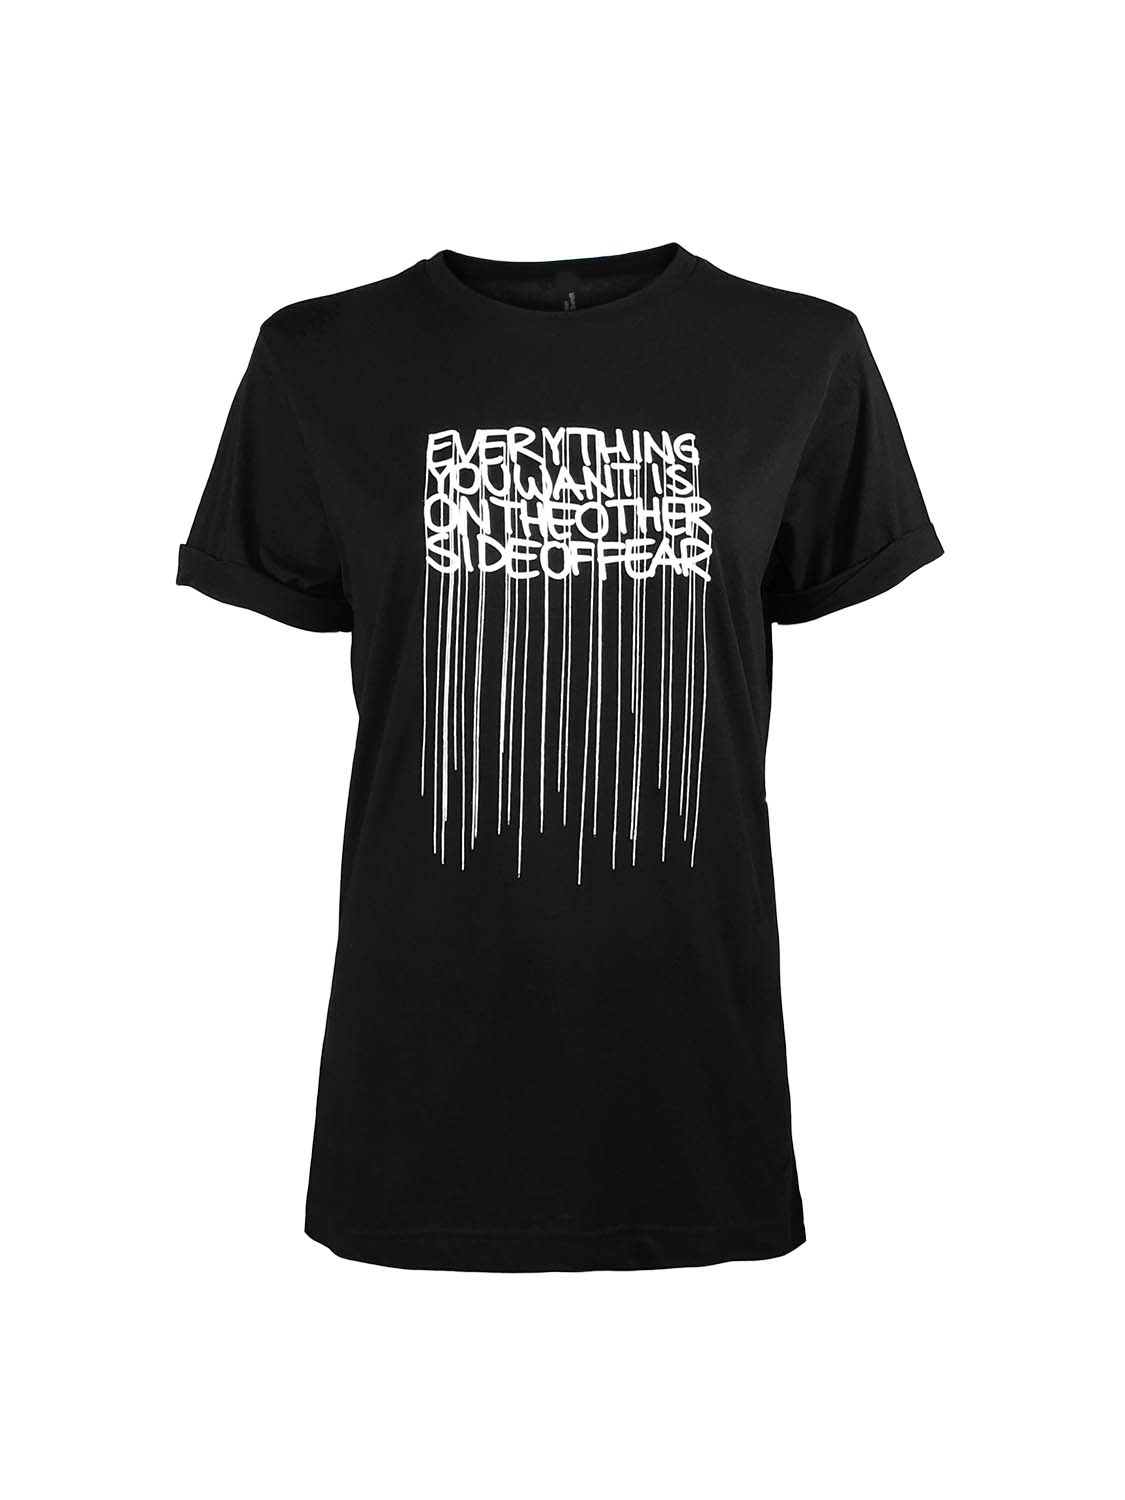 OTHER SIDE OF FEAR - Statement T-Shirt - Men